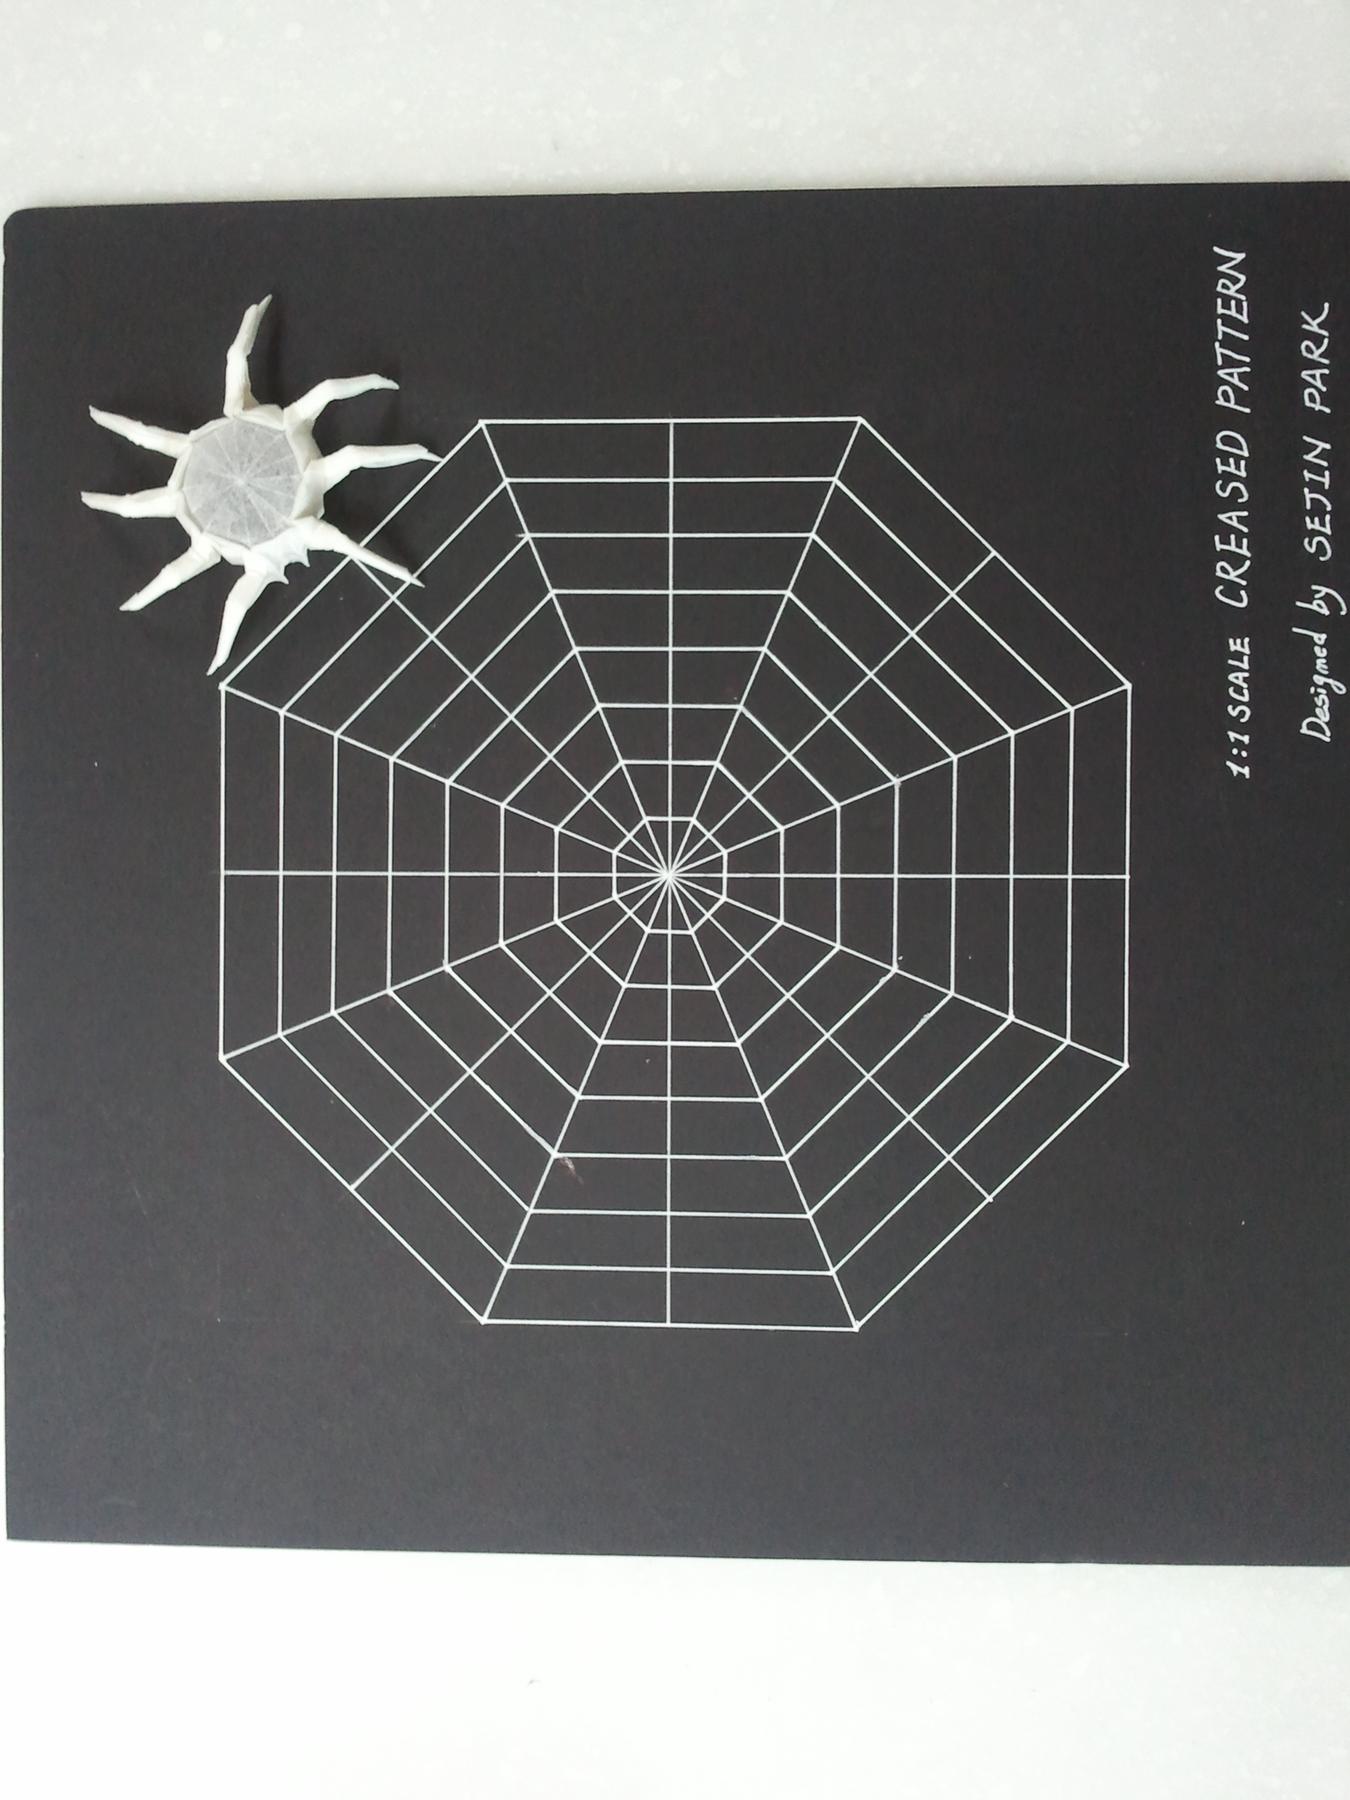 Image for entry 'spider on the creased web'